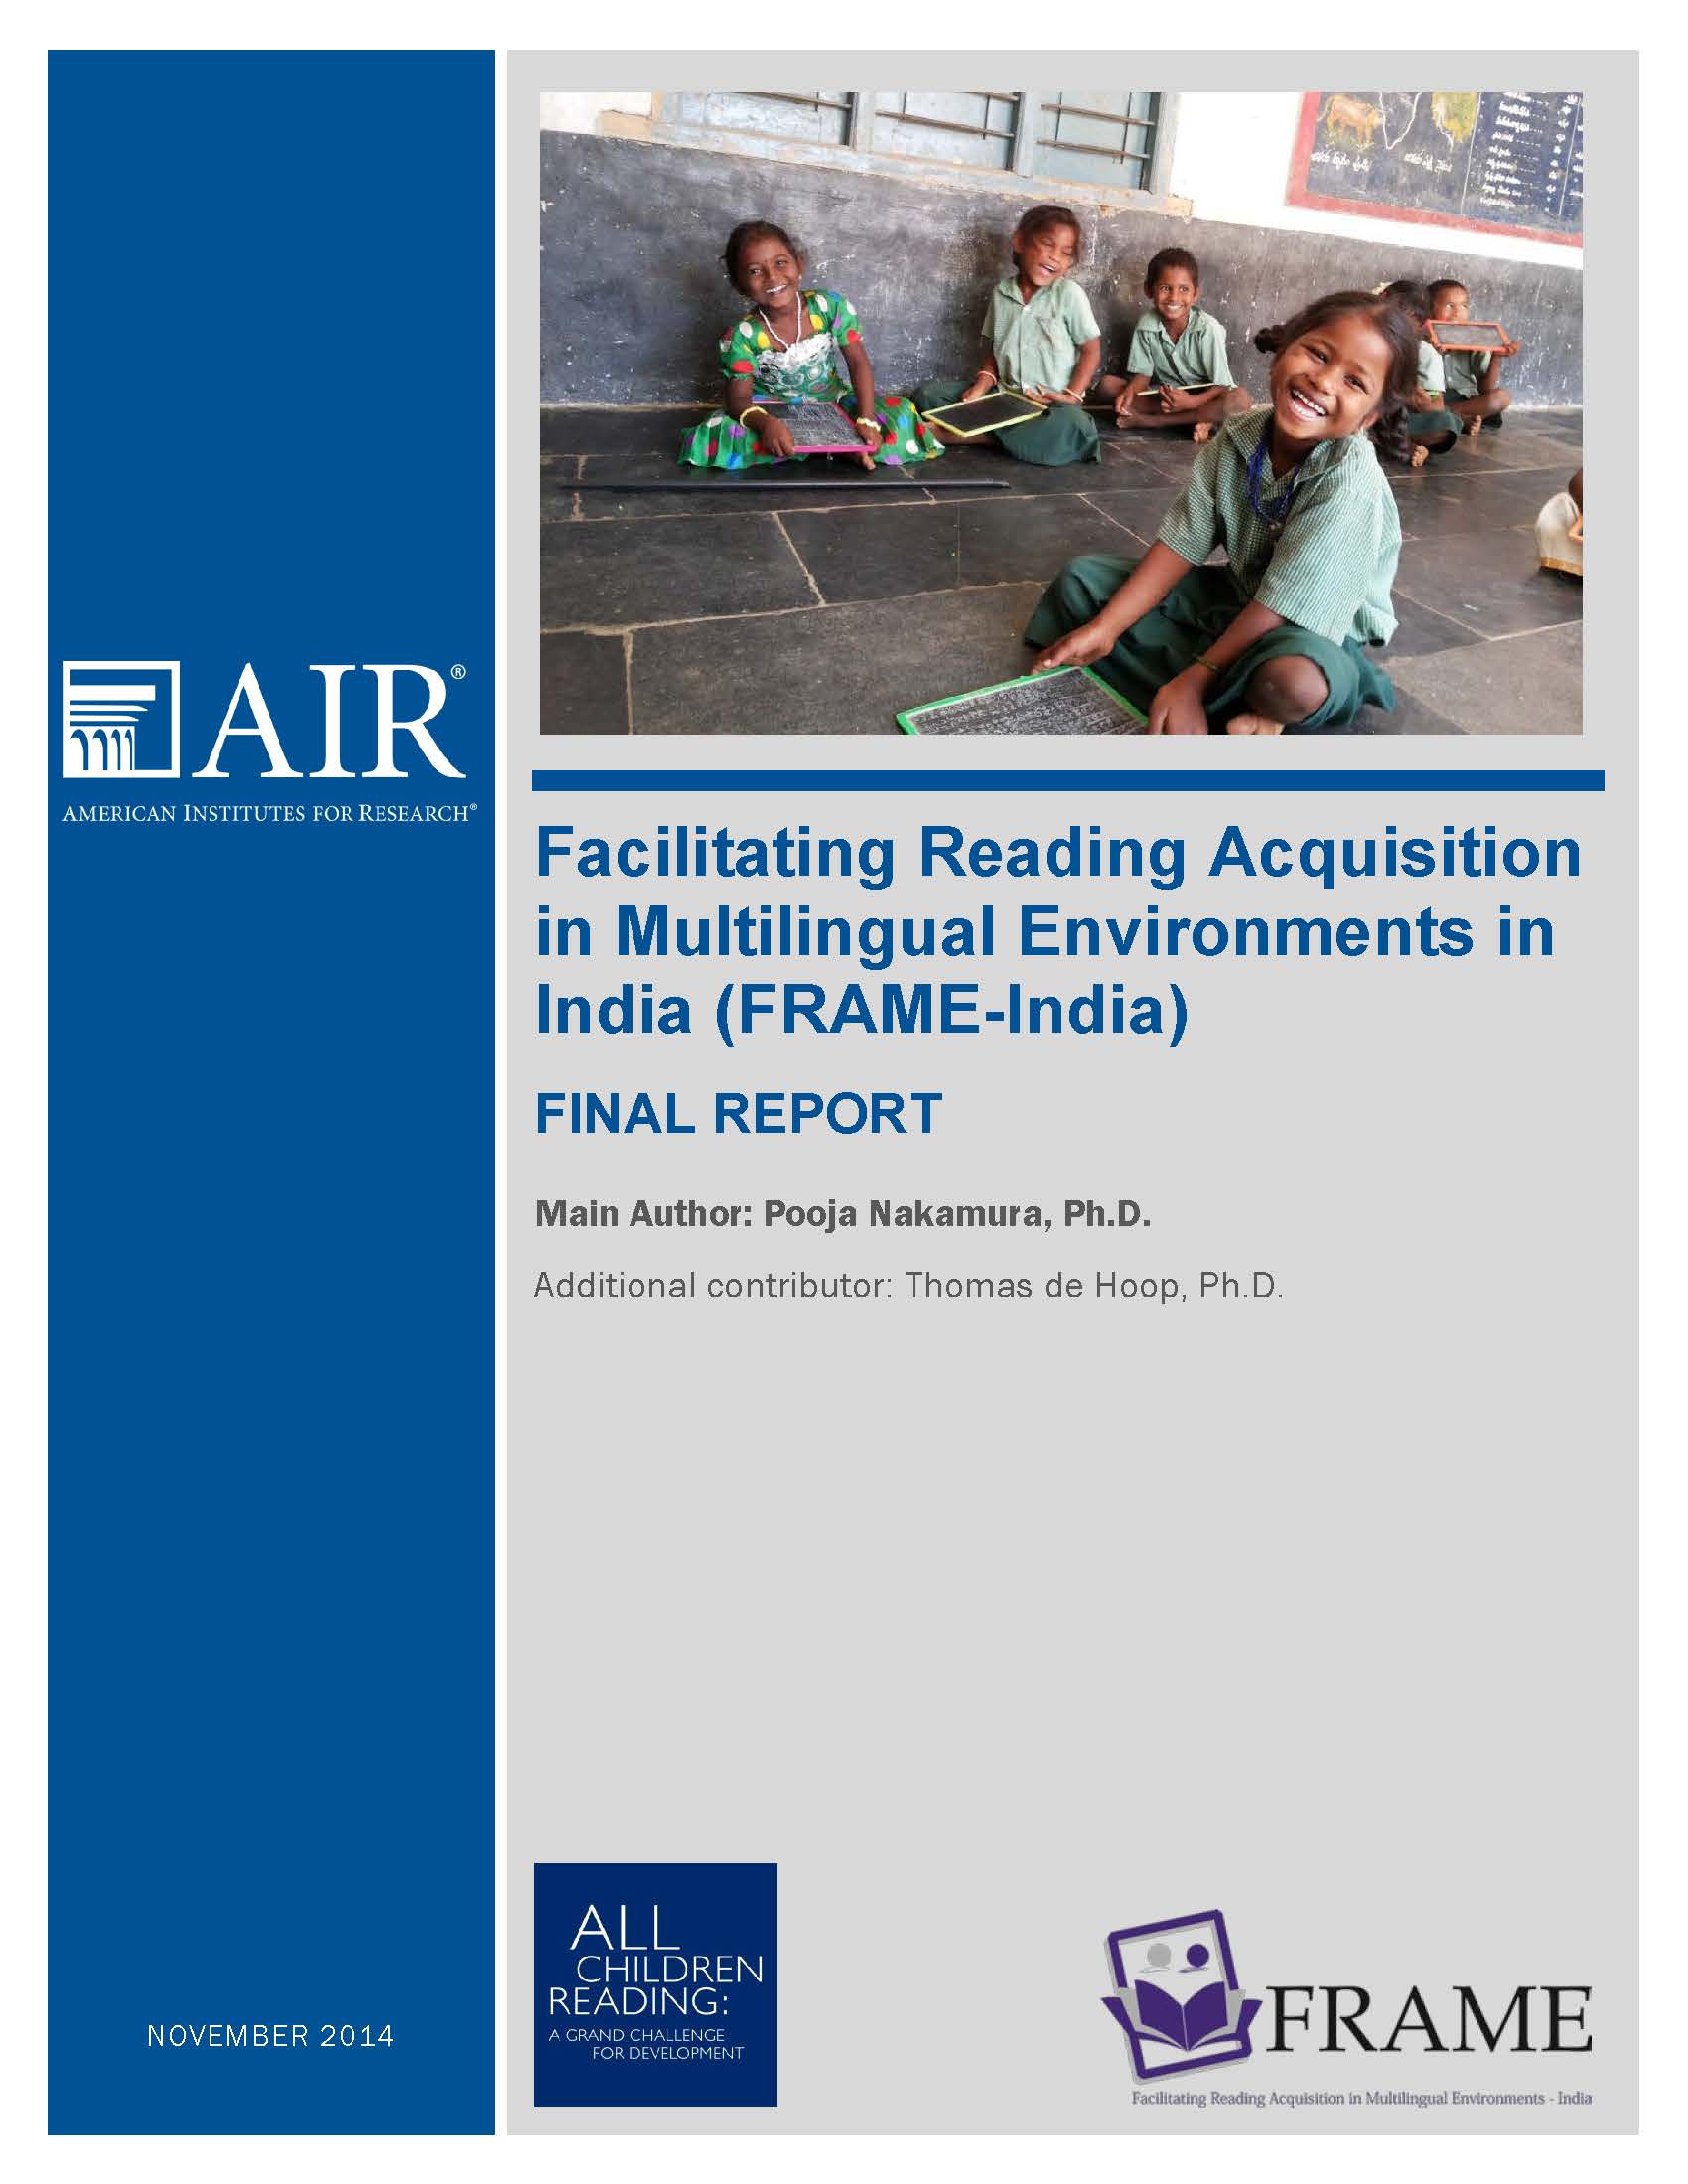 Facilitating Reading Acquisition in Multilingual Environments in India